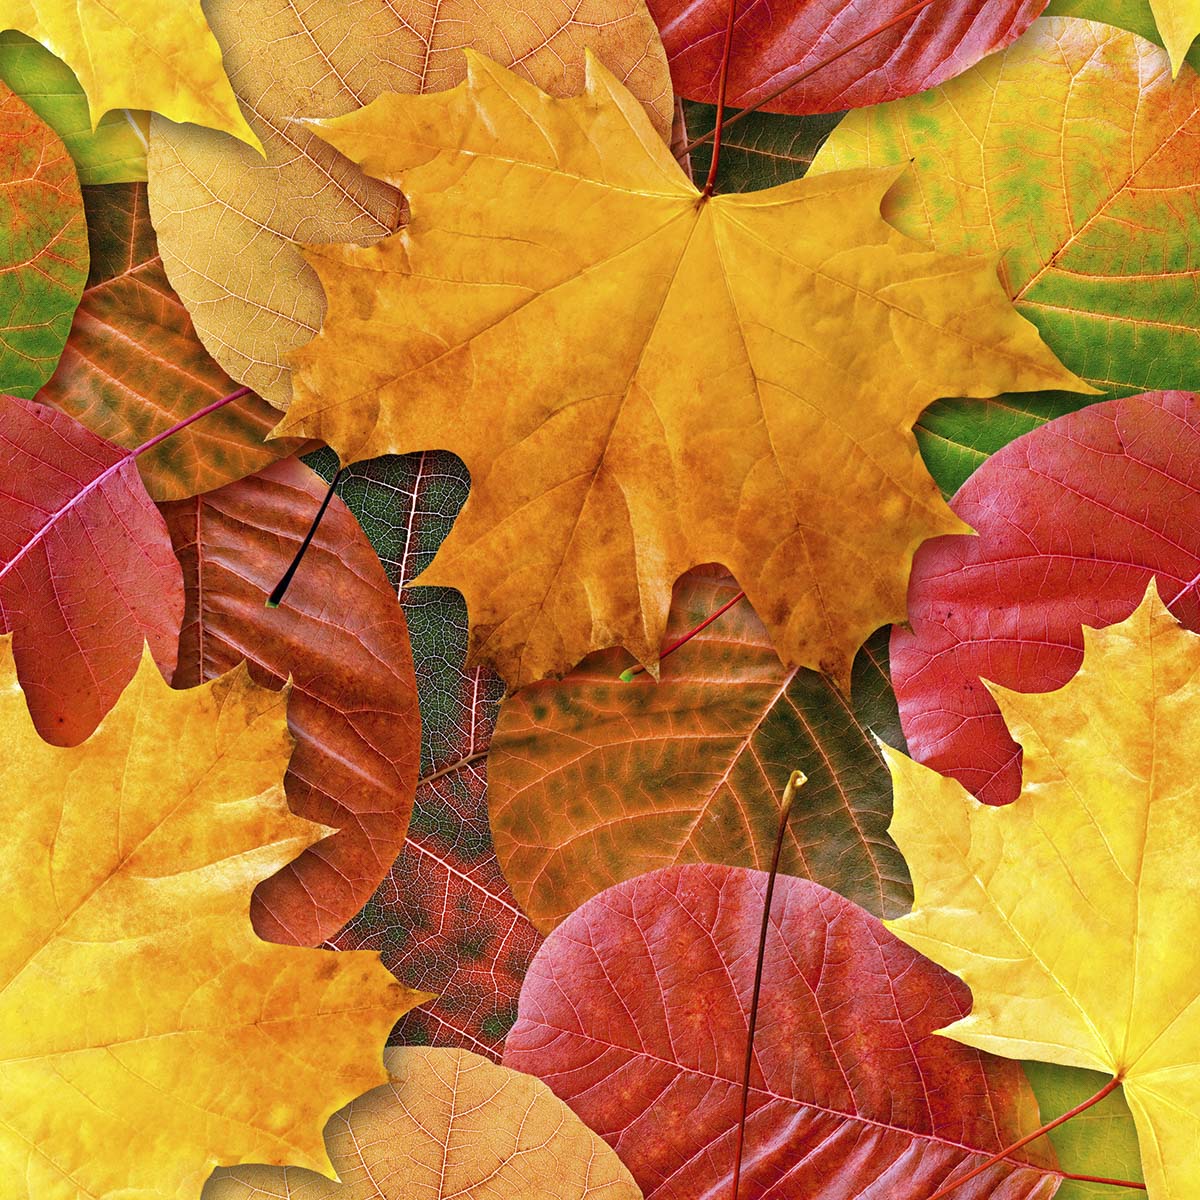 A group of colorful leaves